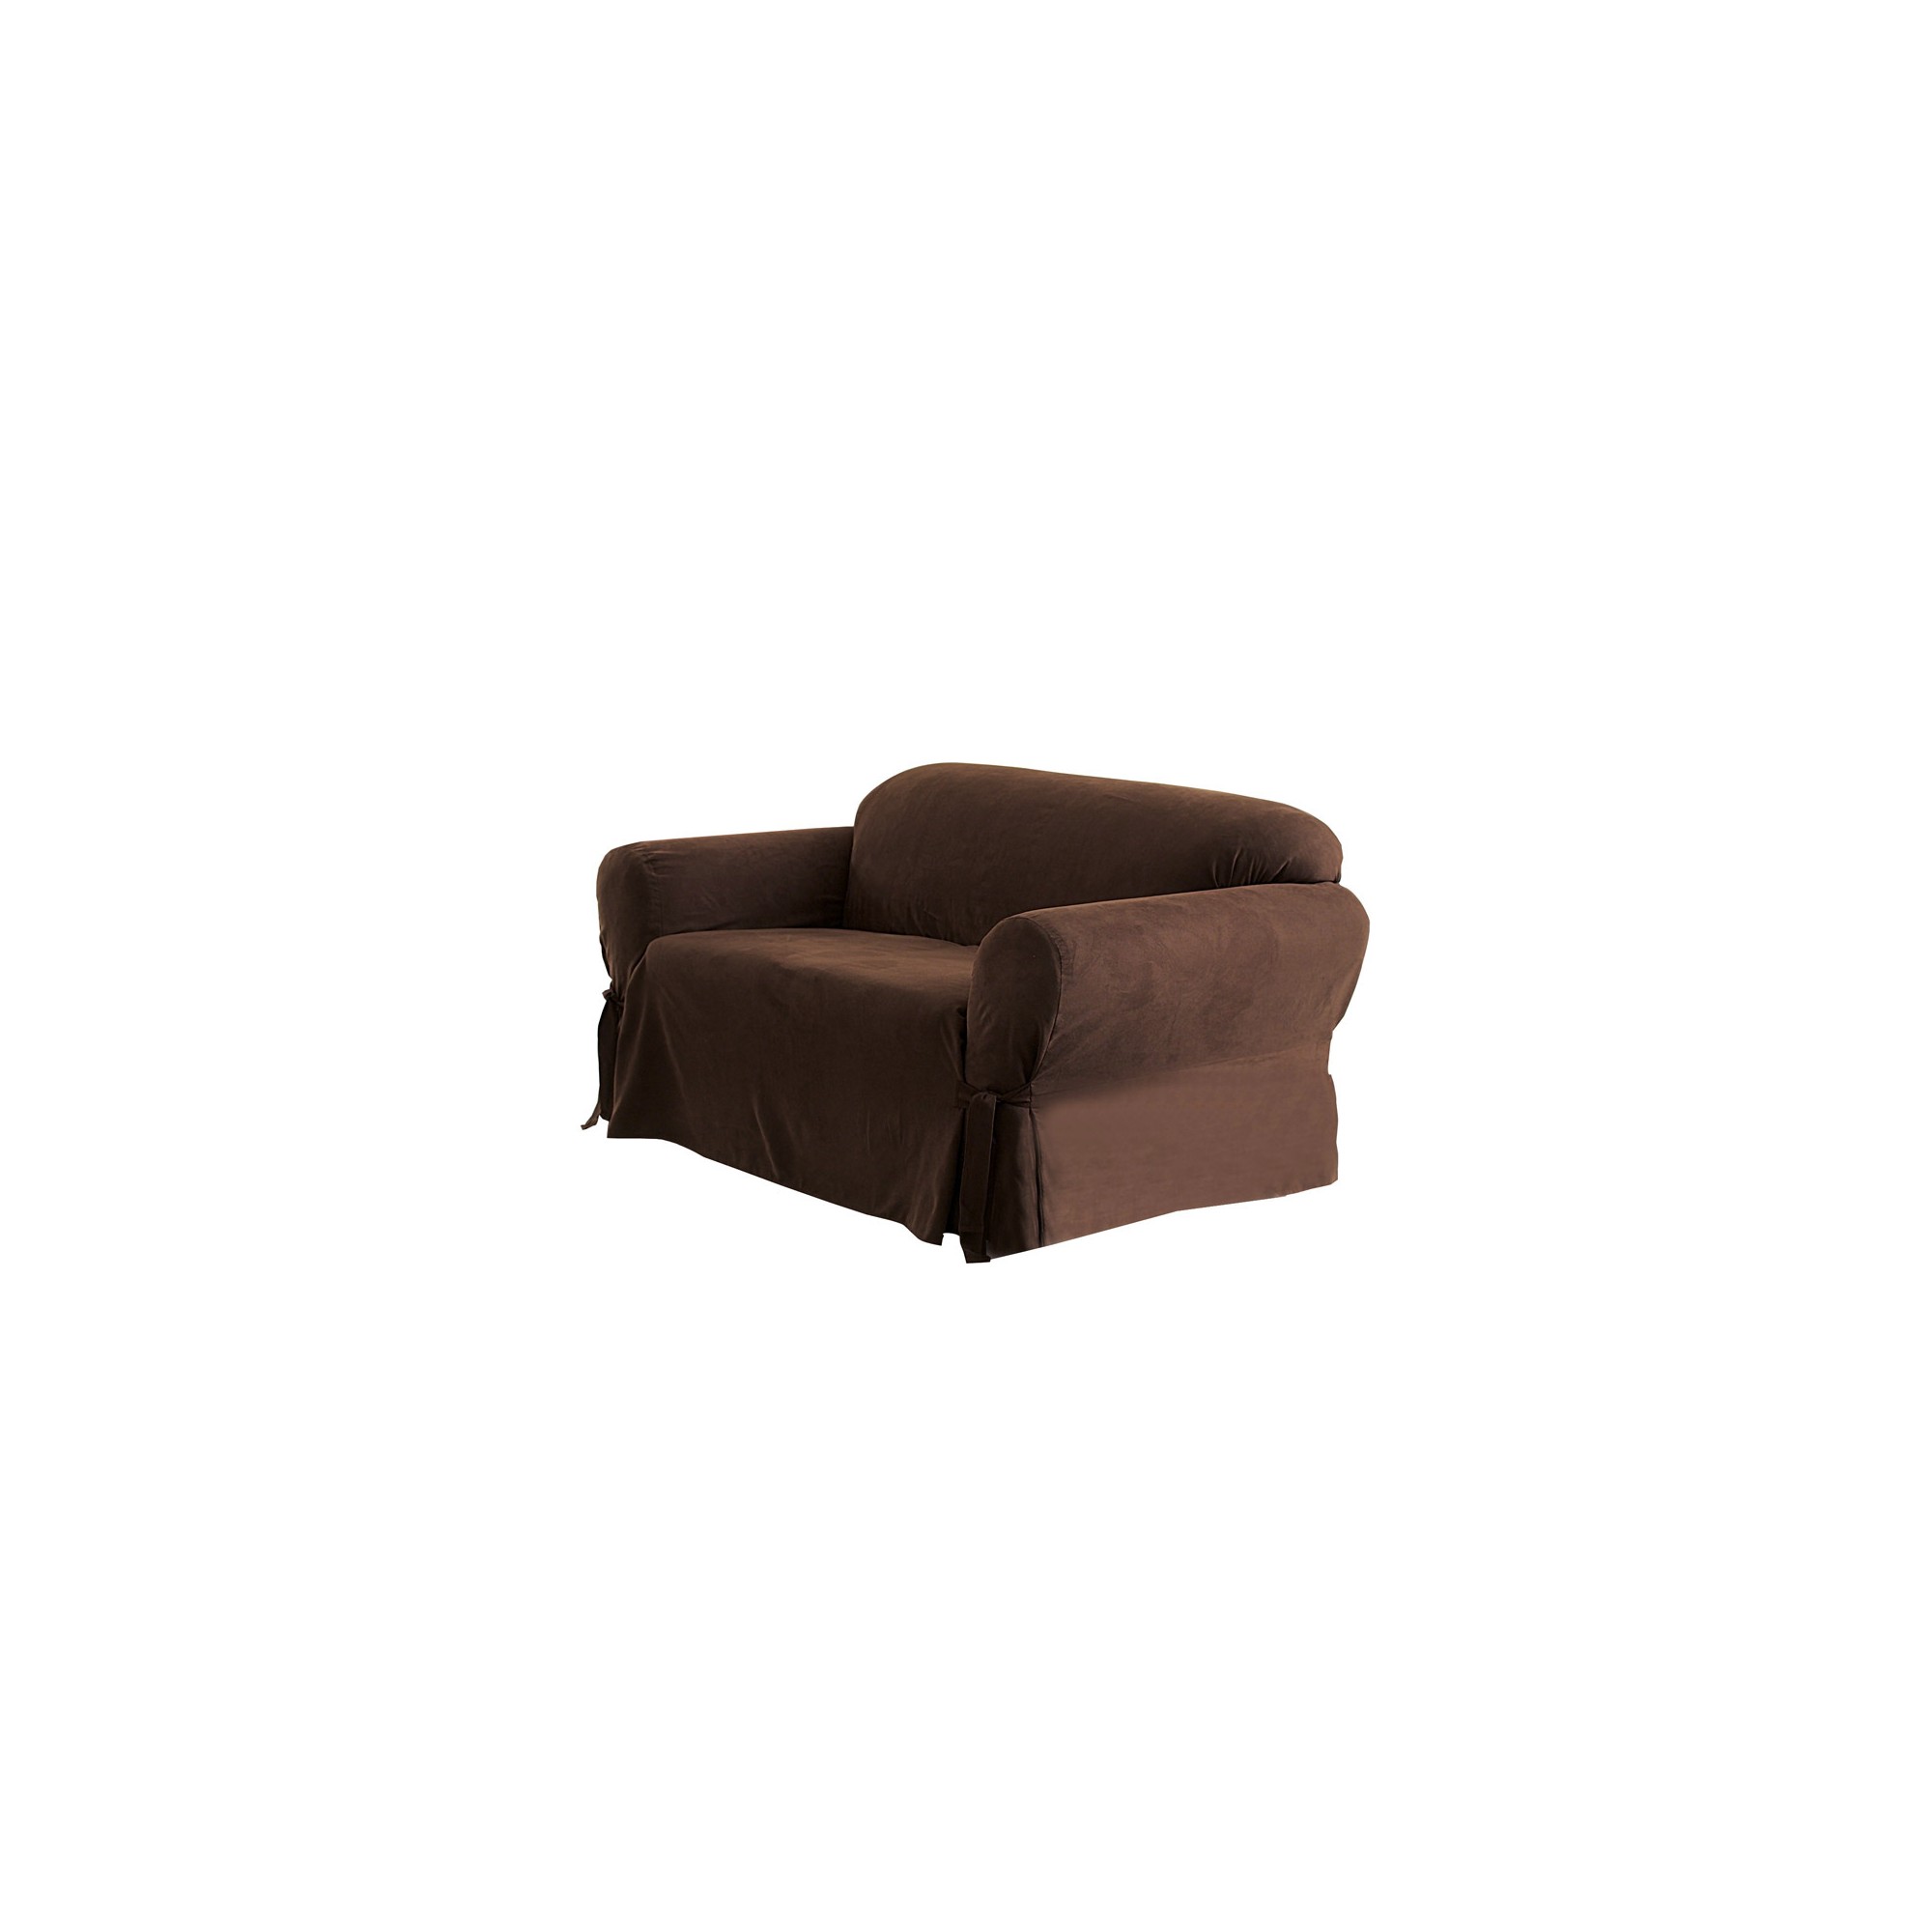 Soft Suede Sofa Slipcover Chocolate - Sure Fit, Brown